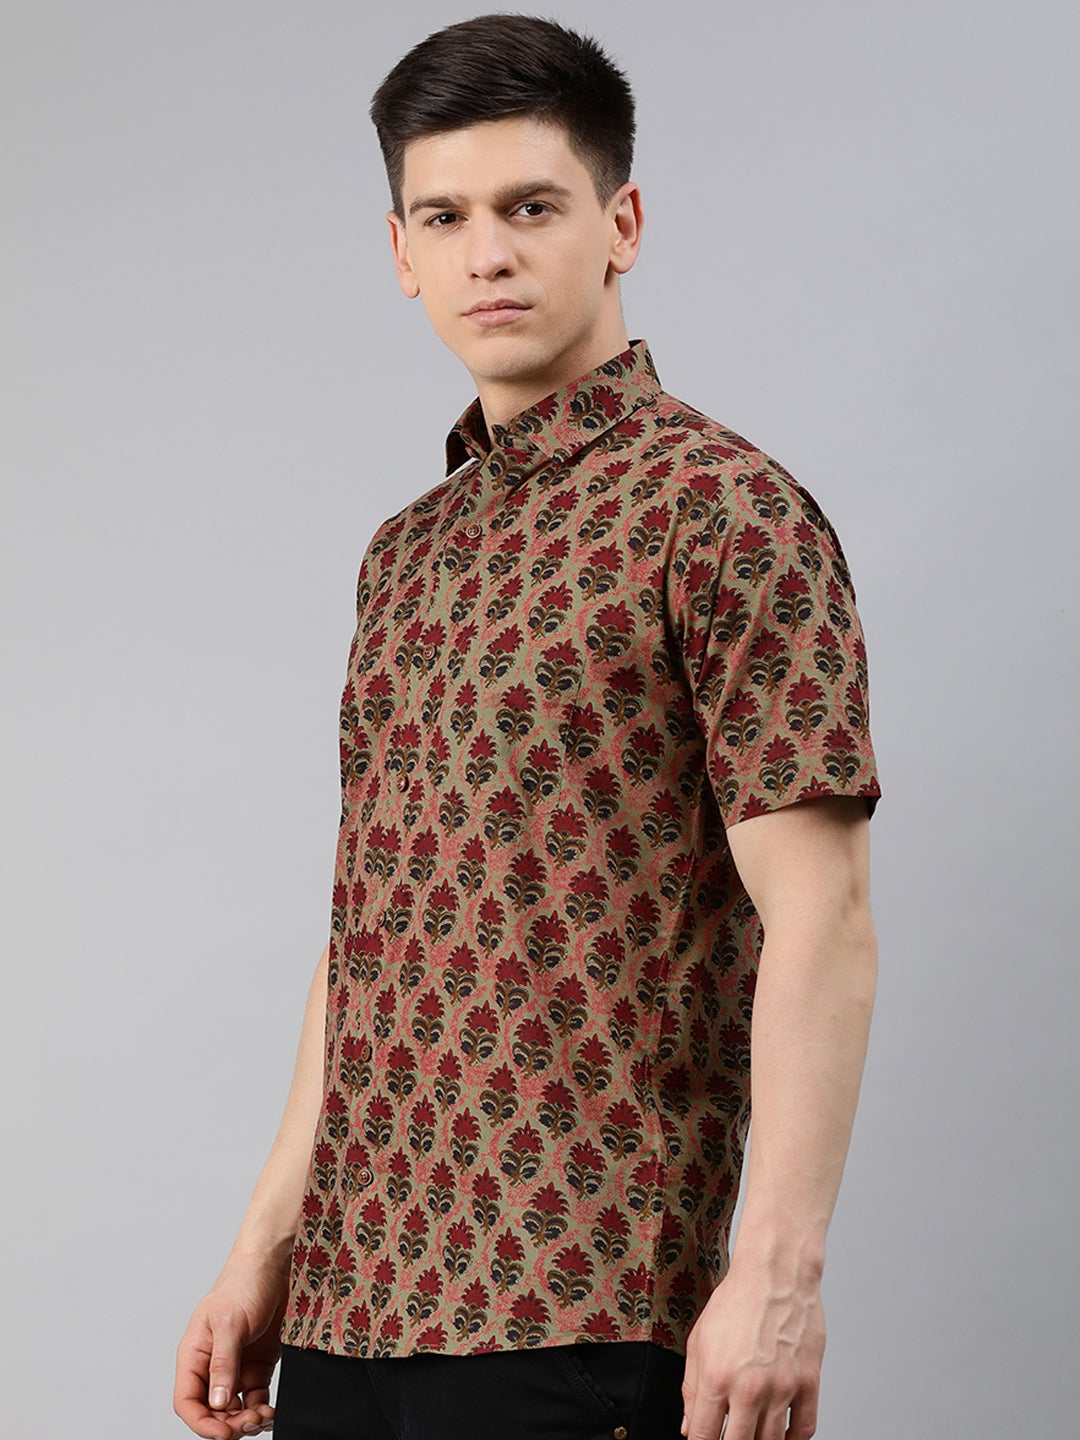 Green Cotton Short Sleeves Shirts For Men